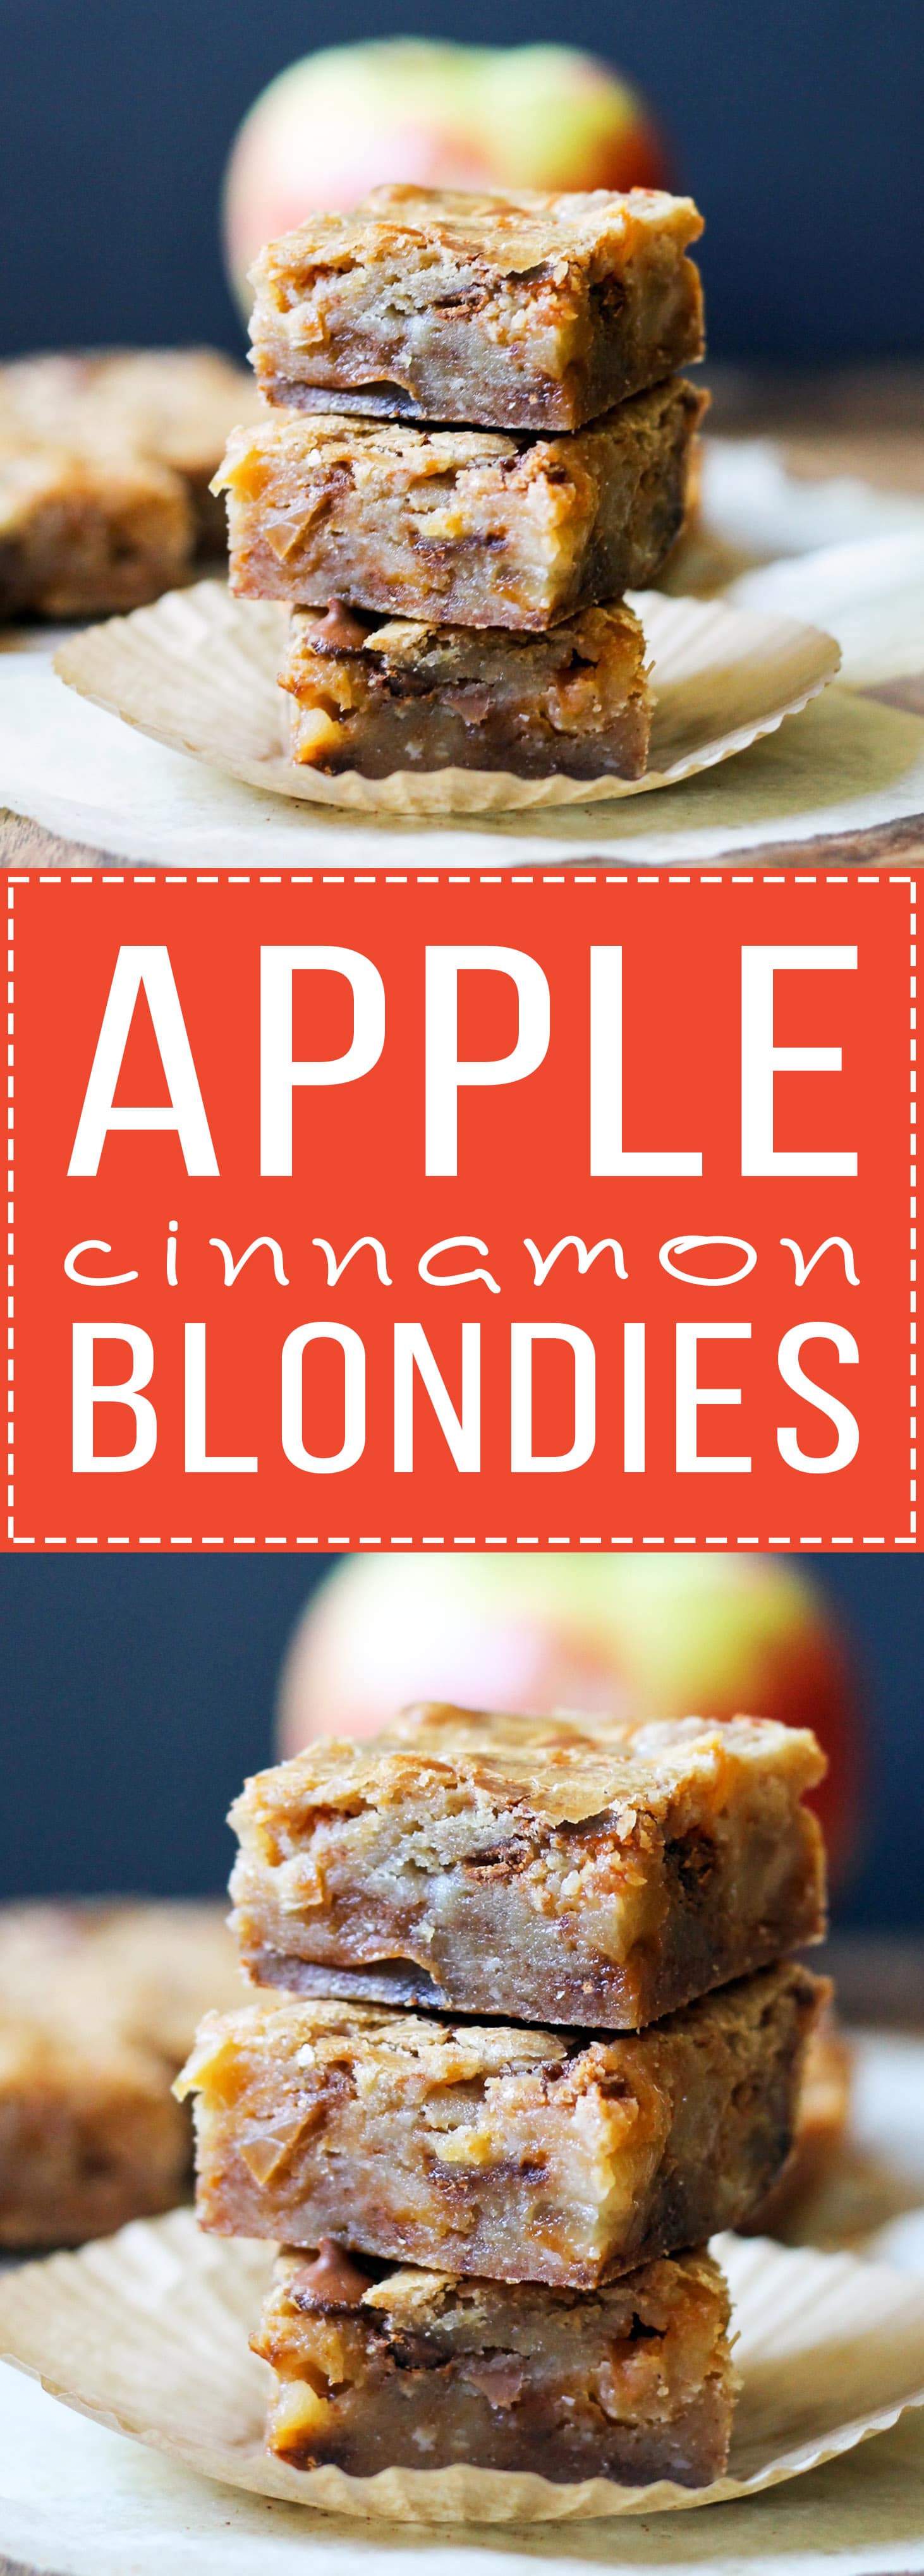 These Apple Cinnamon Blondies have sautéed apples and cinnamon chips for the ultimate portable fall treat! This easy recipe comes together quickly and tastes like apple pie.